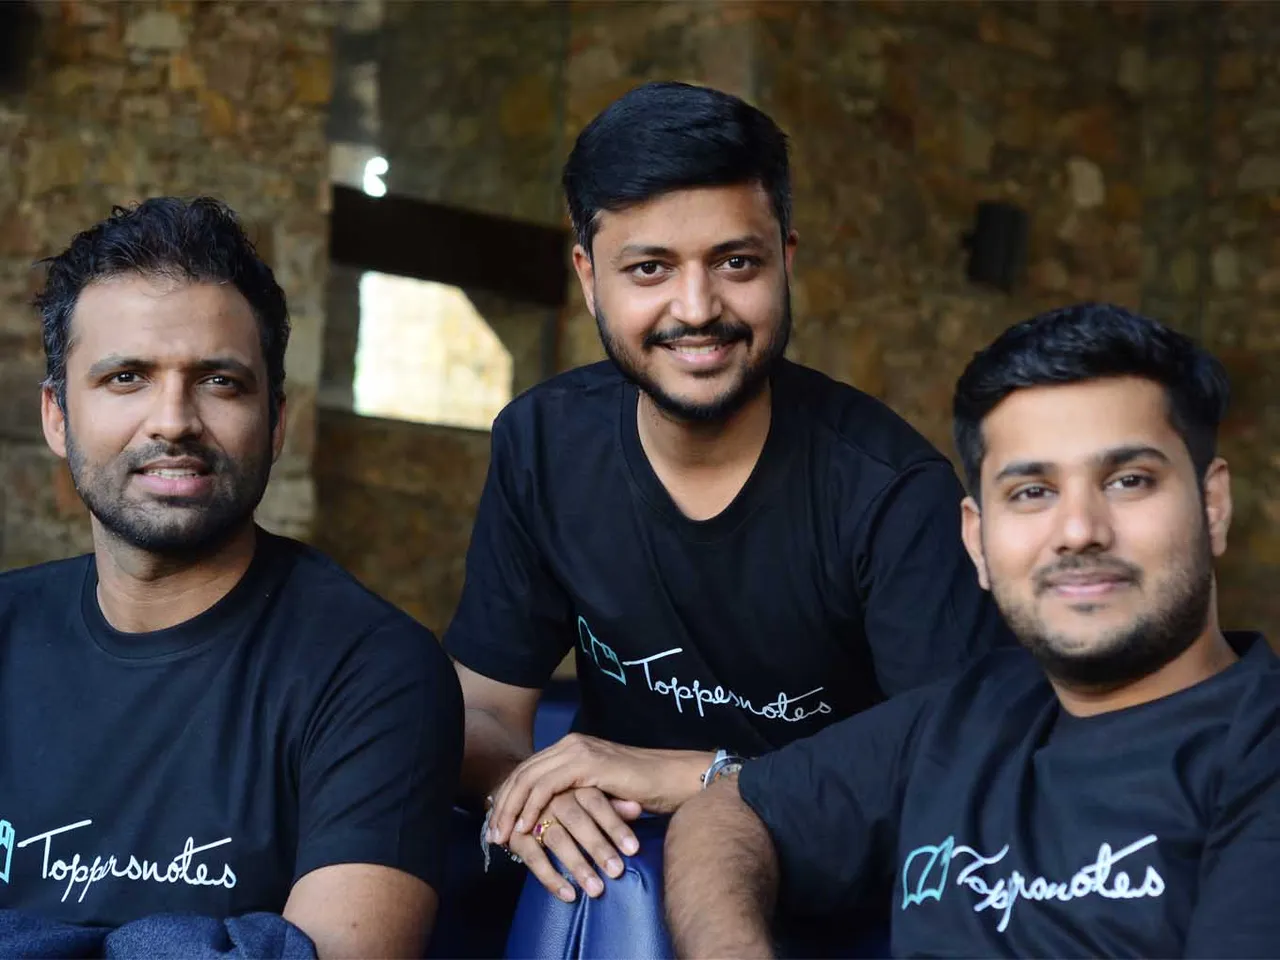 Test prep startup Toppersnotes raises $1M in funding led by Inflection Point Ventures